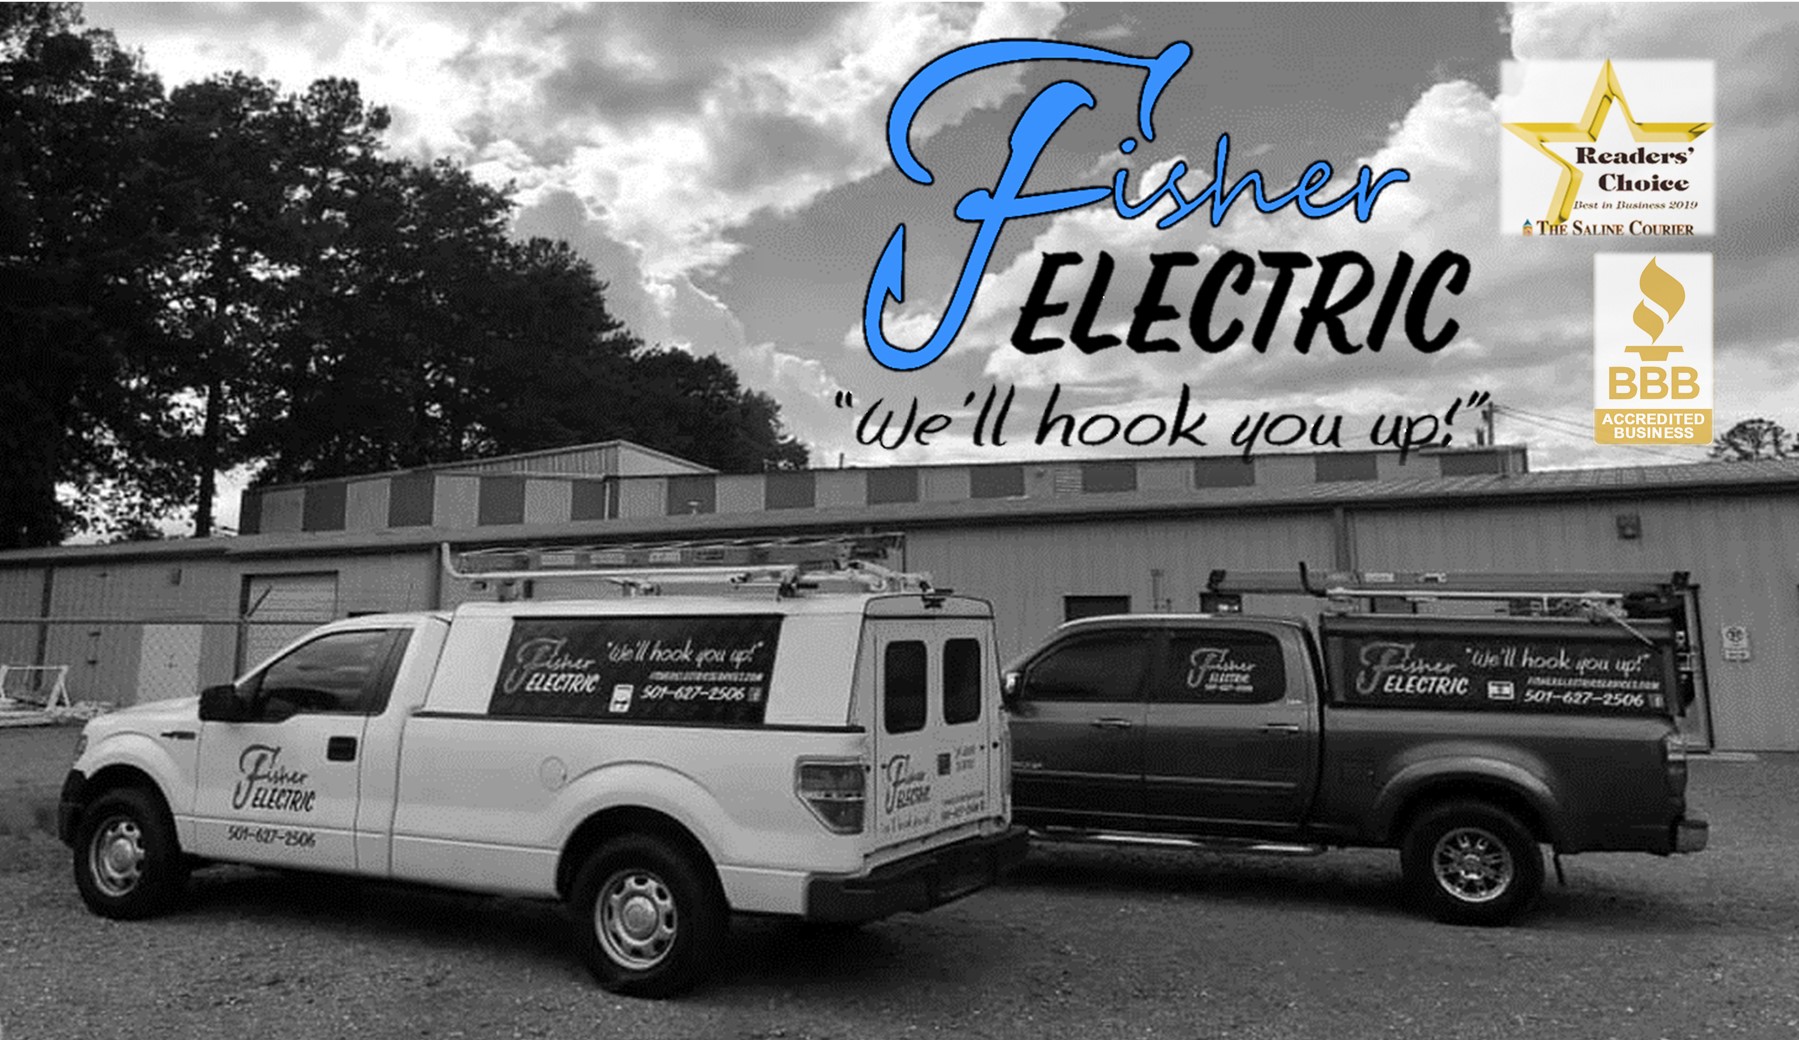 Fisher Electric